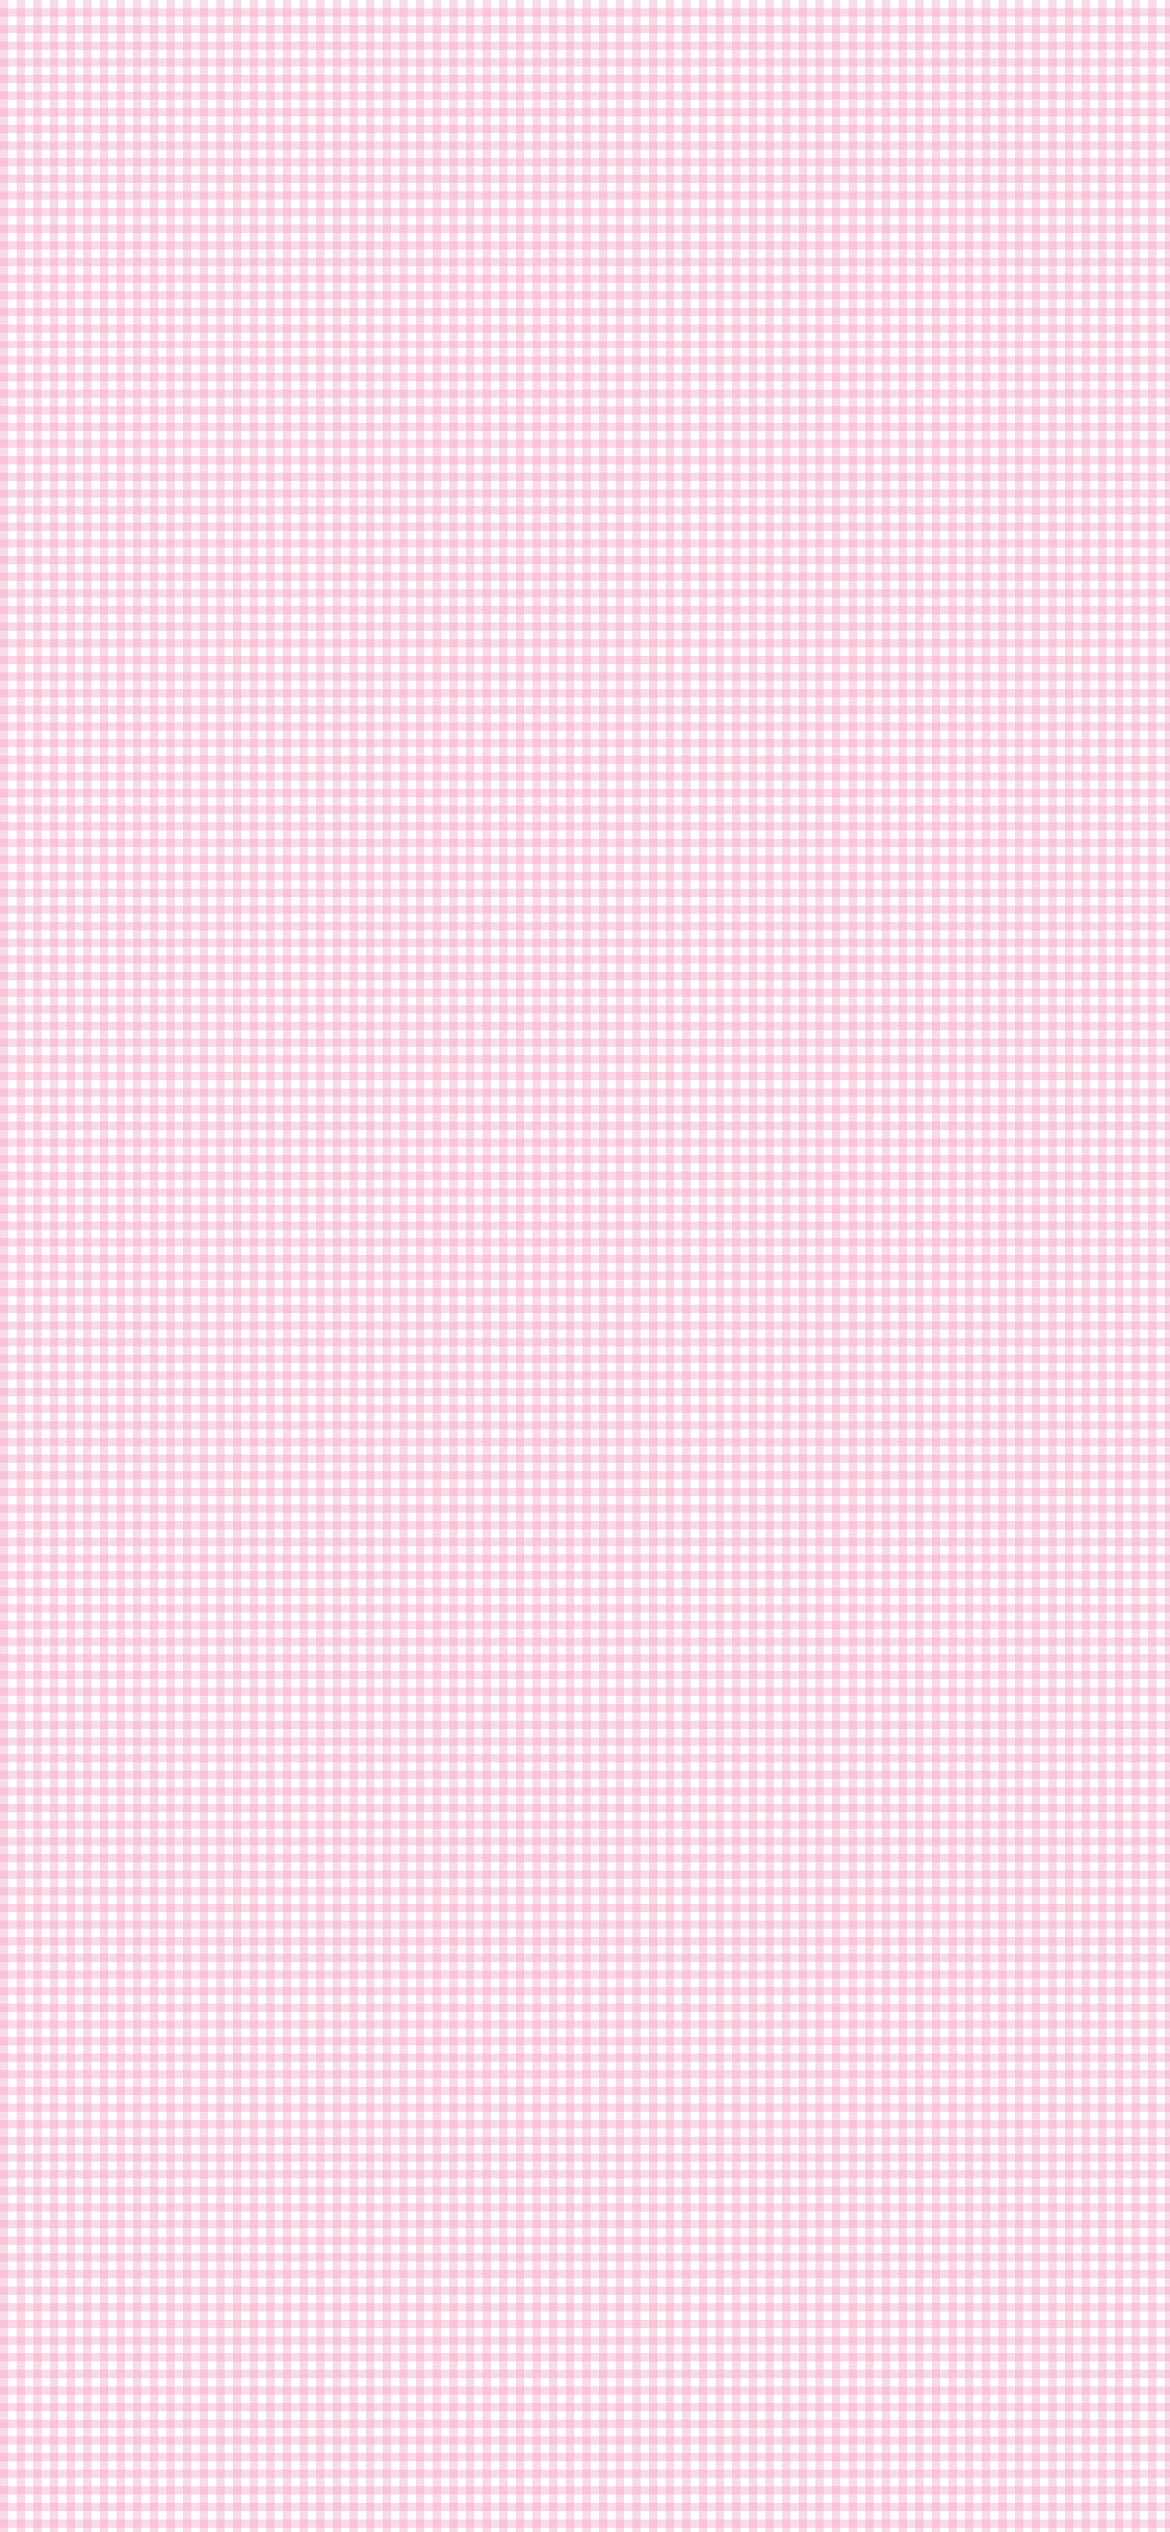 A pink and white grid pattern - Grid